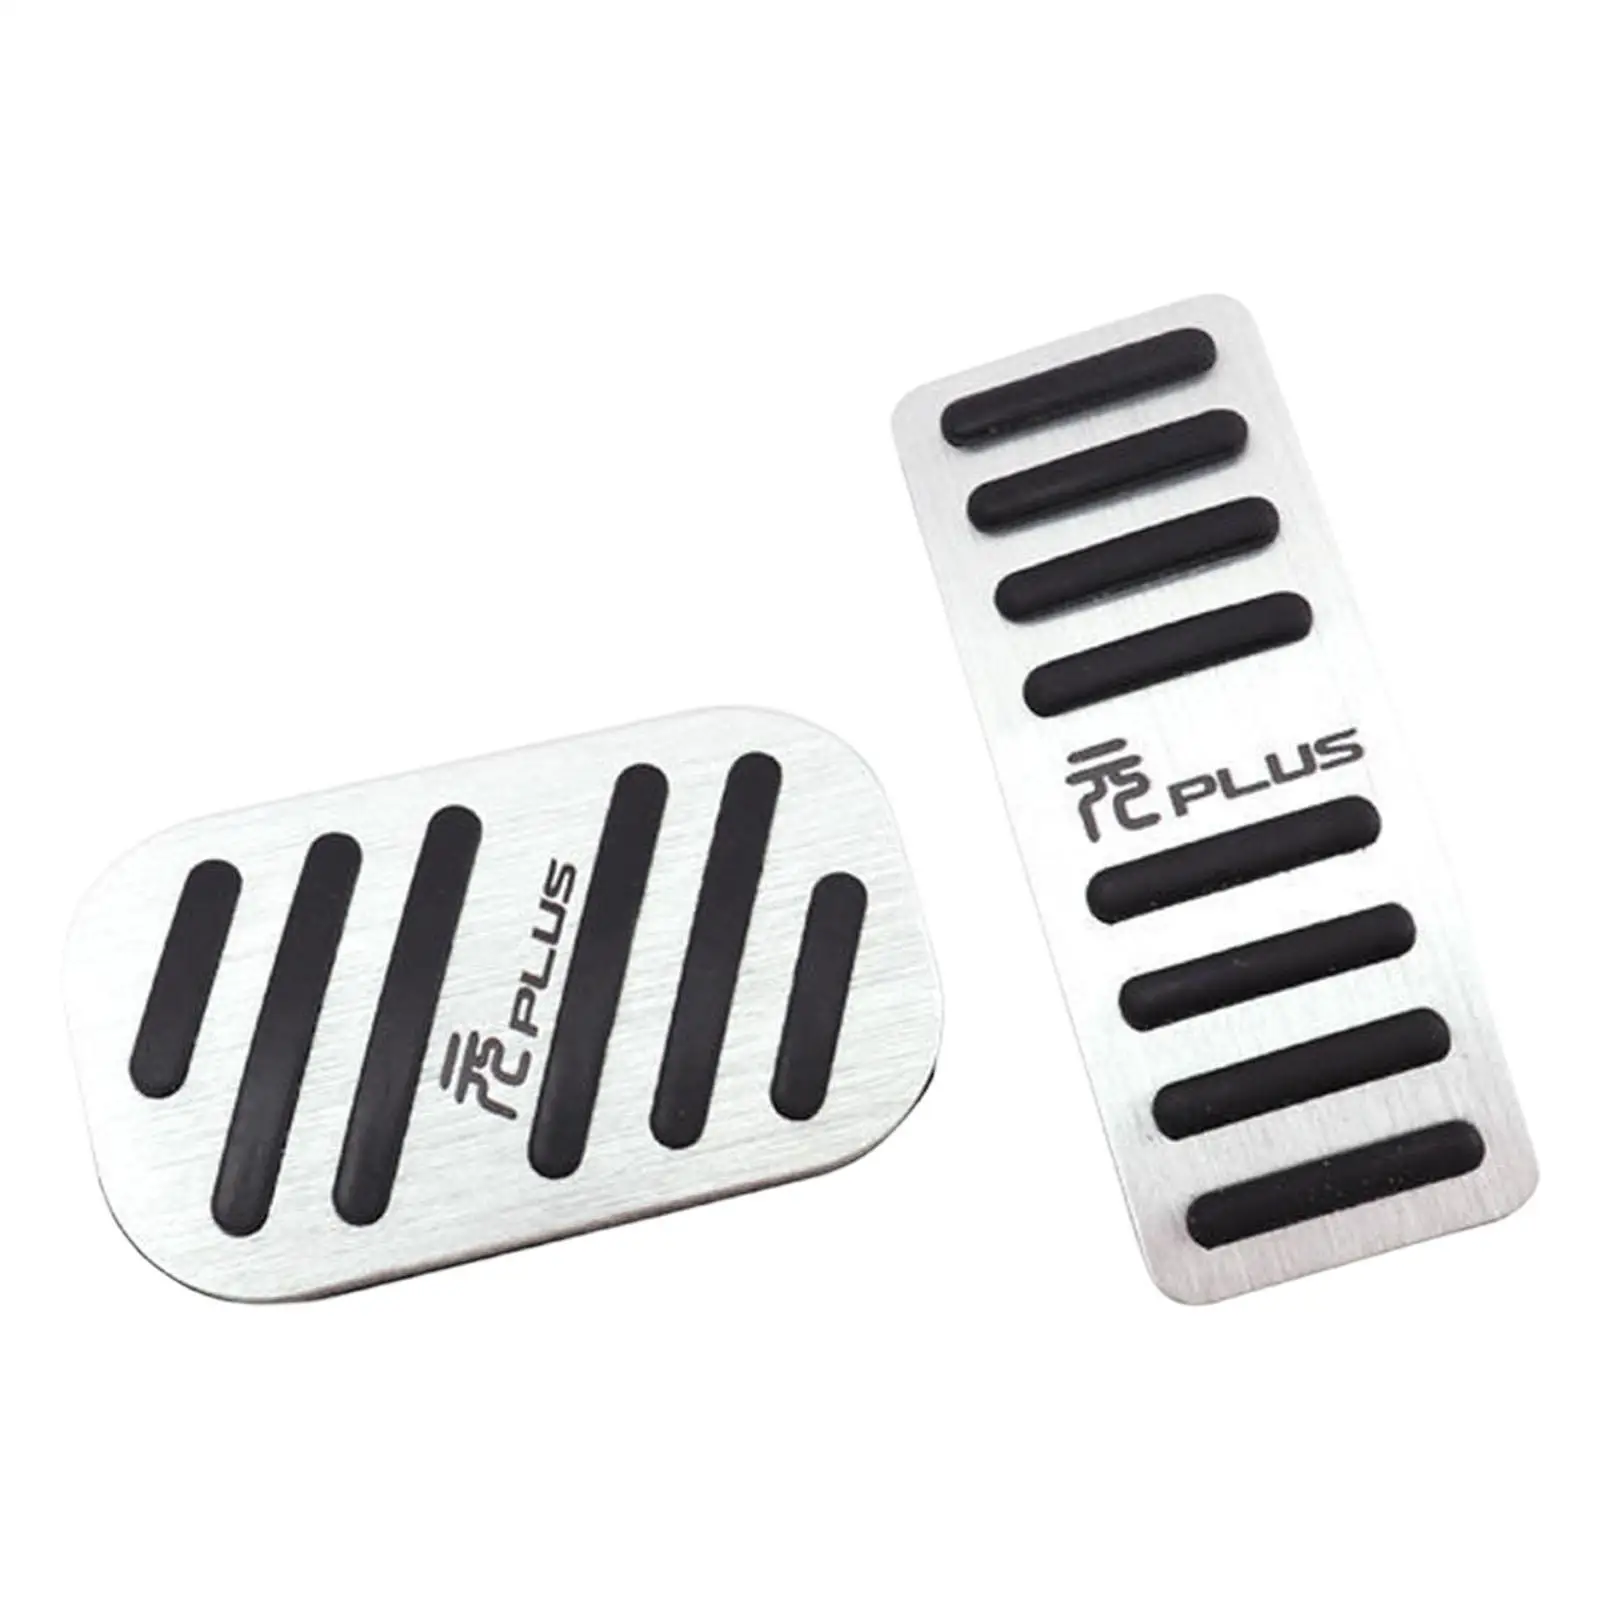 Gas Brake Pedal Cover Set Anti Slip Wear Resistant Foot Pedals Pads for Byd Atto 3 Yuan Plus Direct Replaces Durable